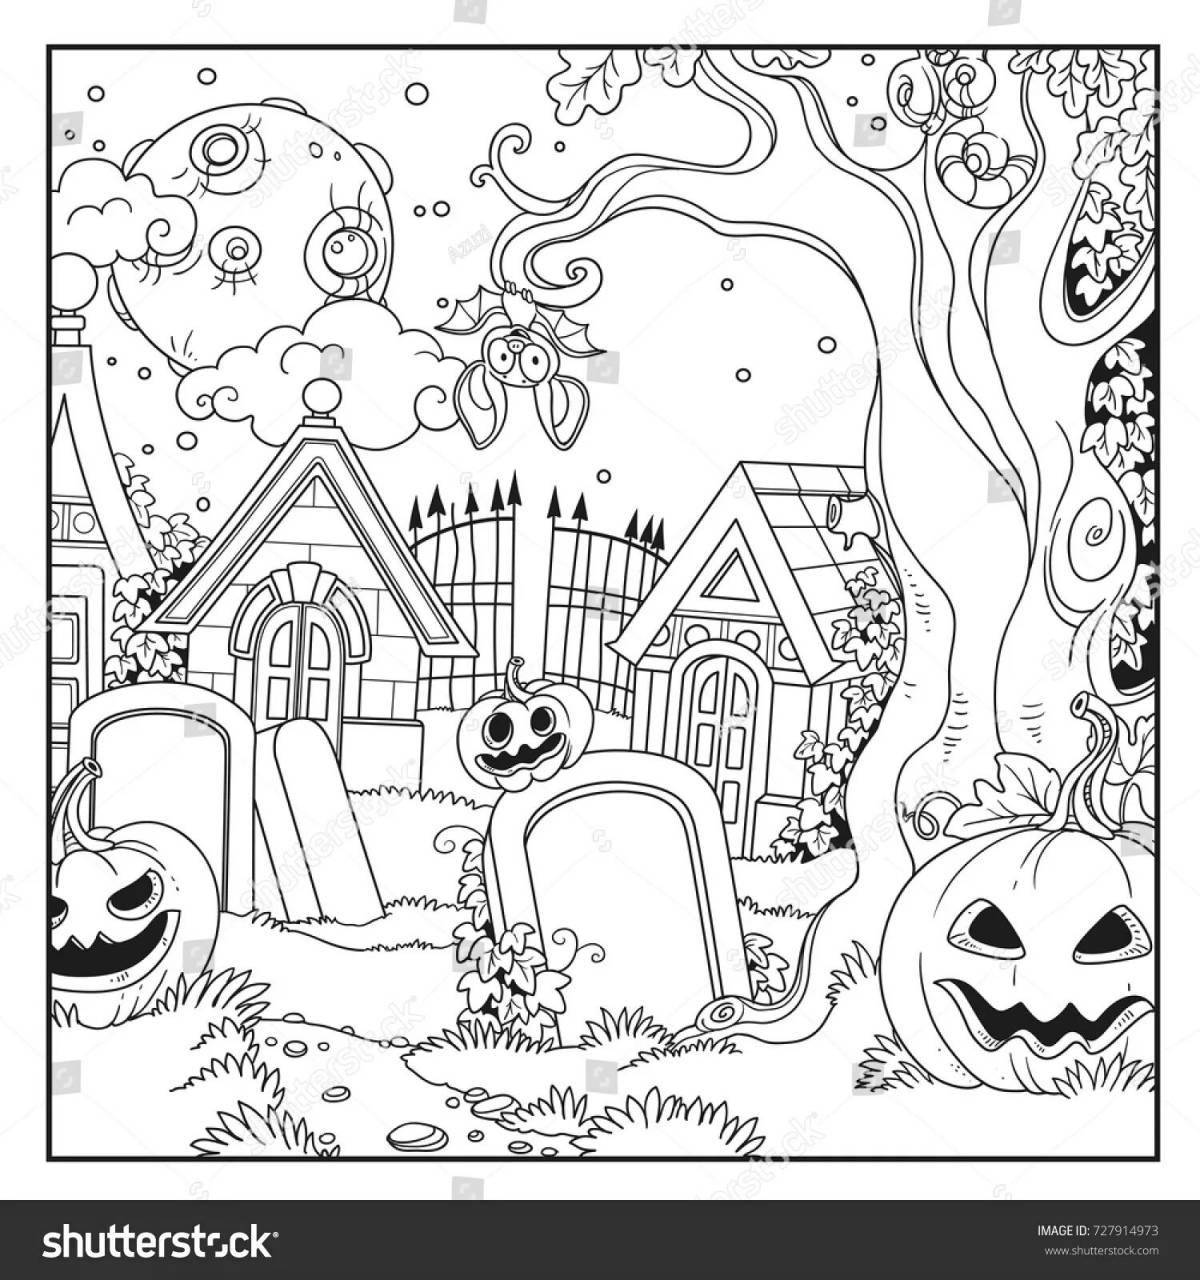 Coloring page chilling cemetery